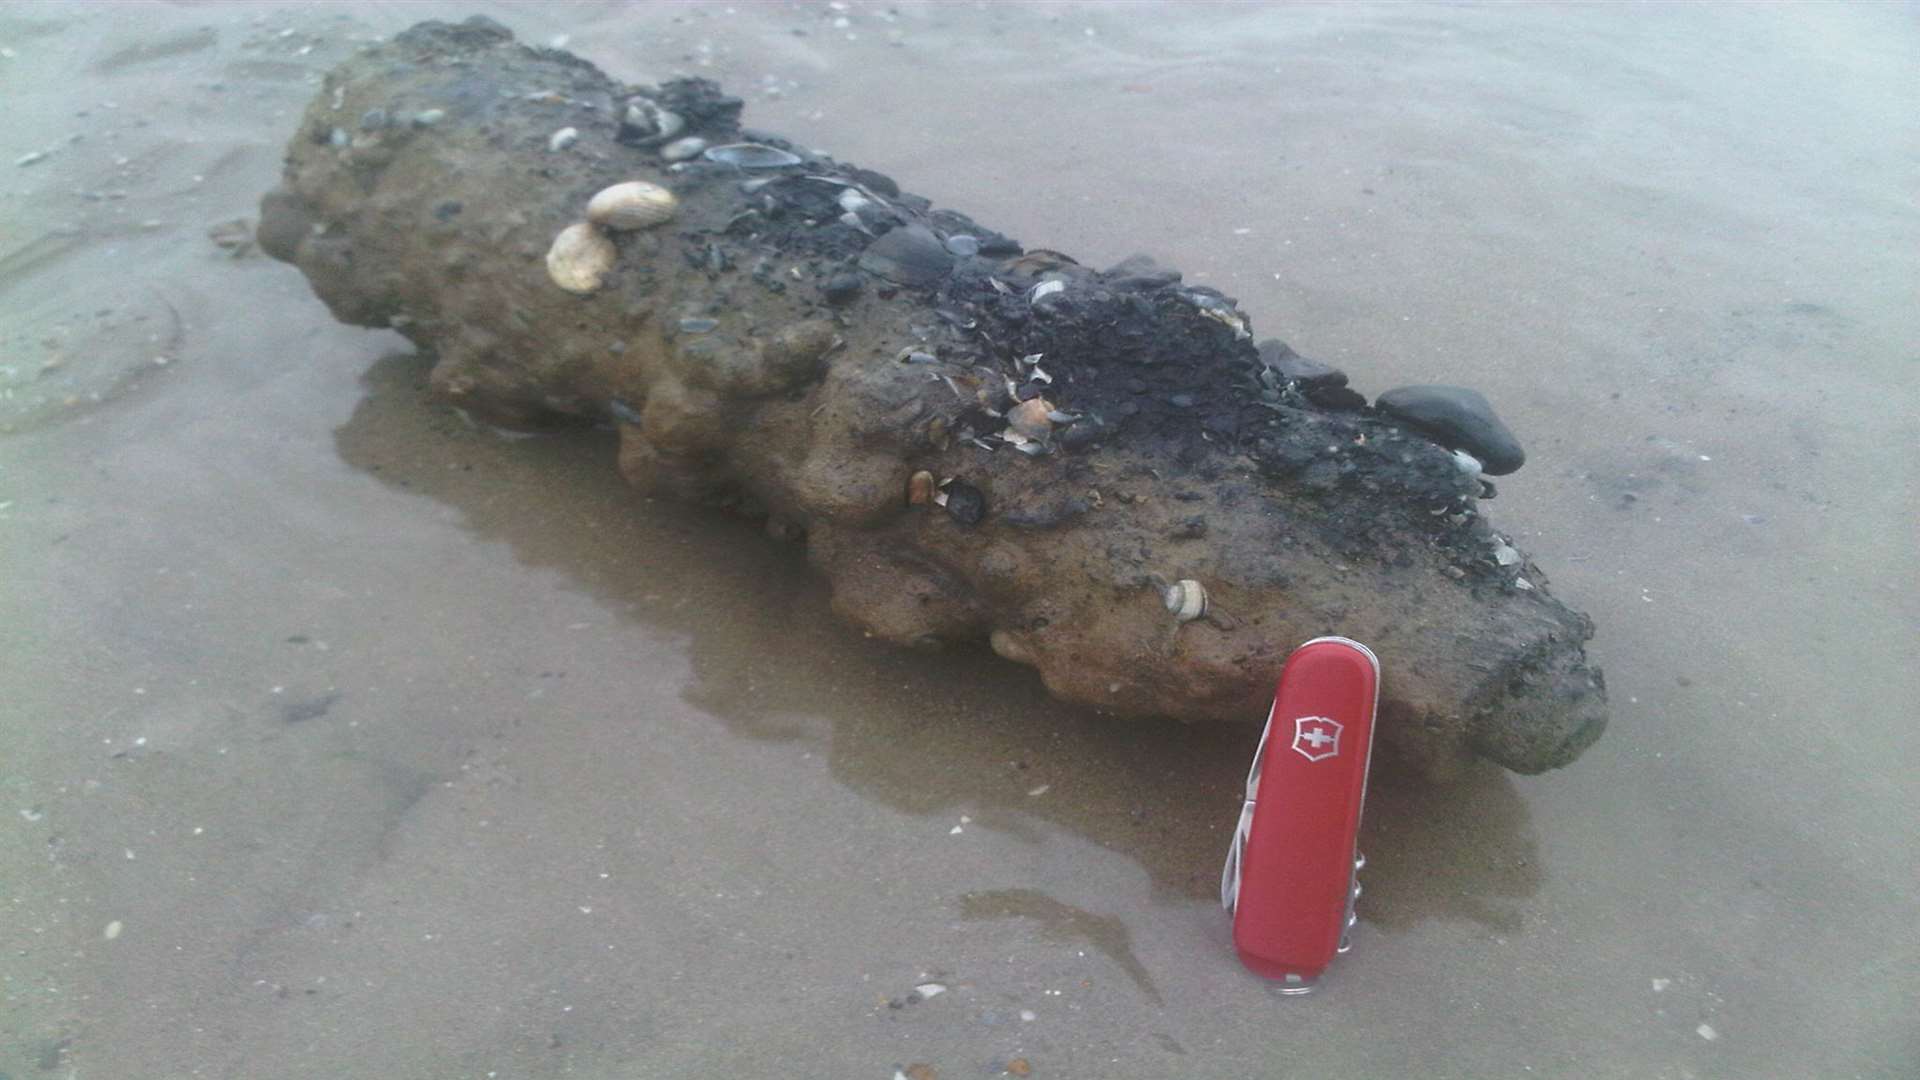 The shell was found at Sandwich Bay on Saturday